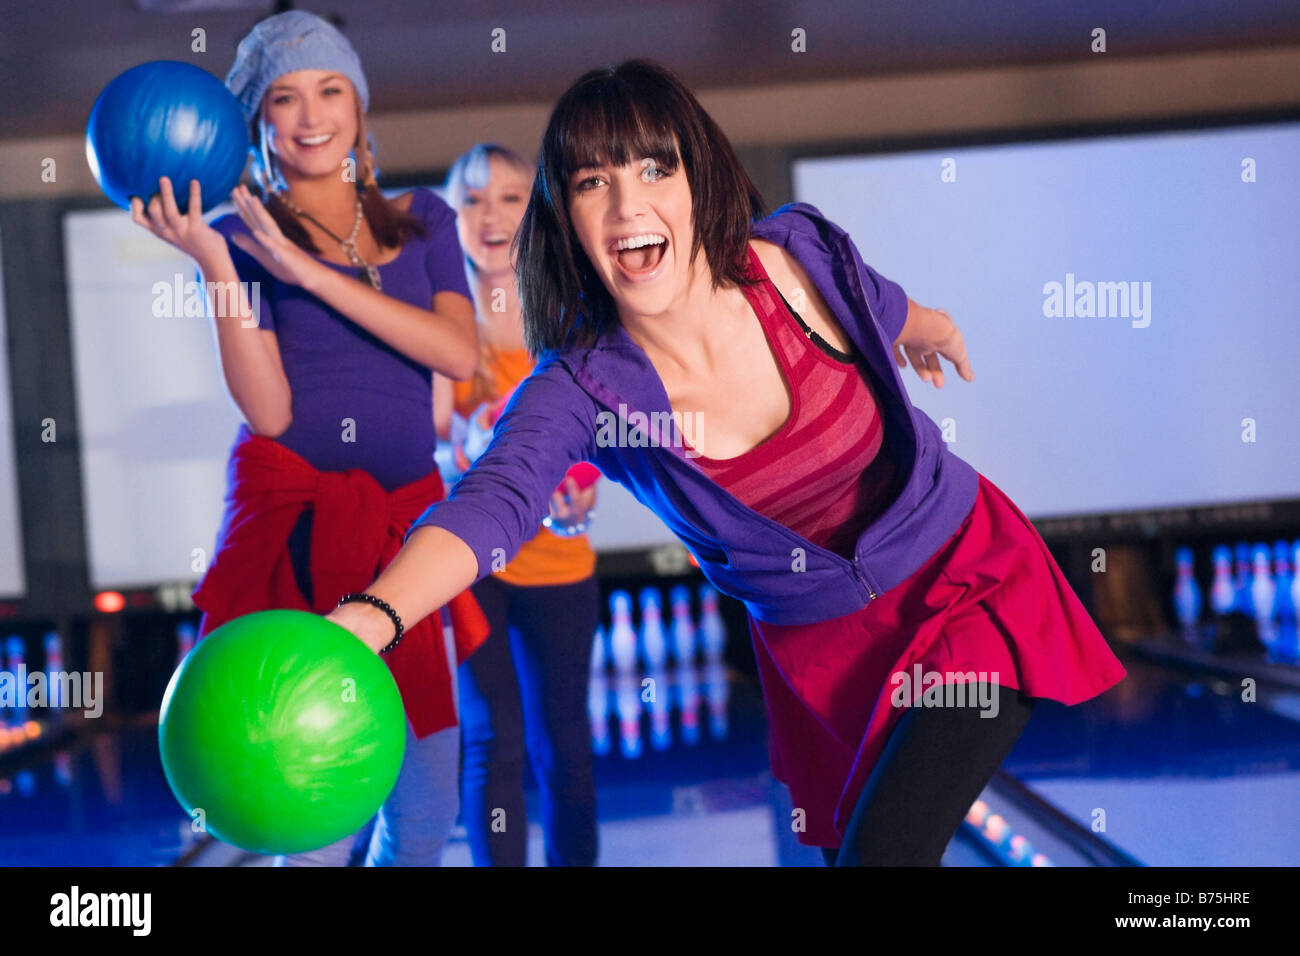 Portrait of a young woman throwing a ball with her friends in the background Stock Photo